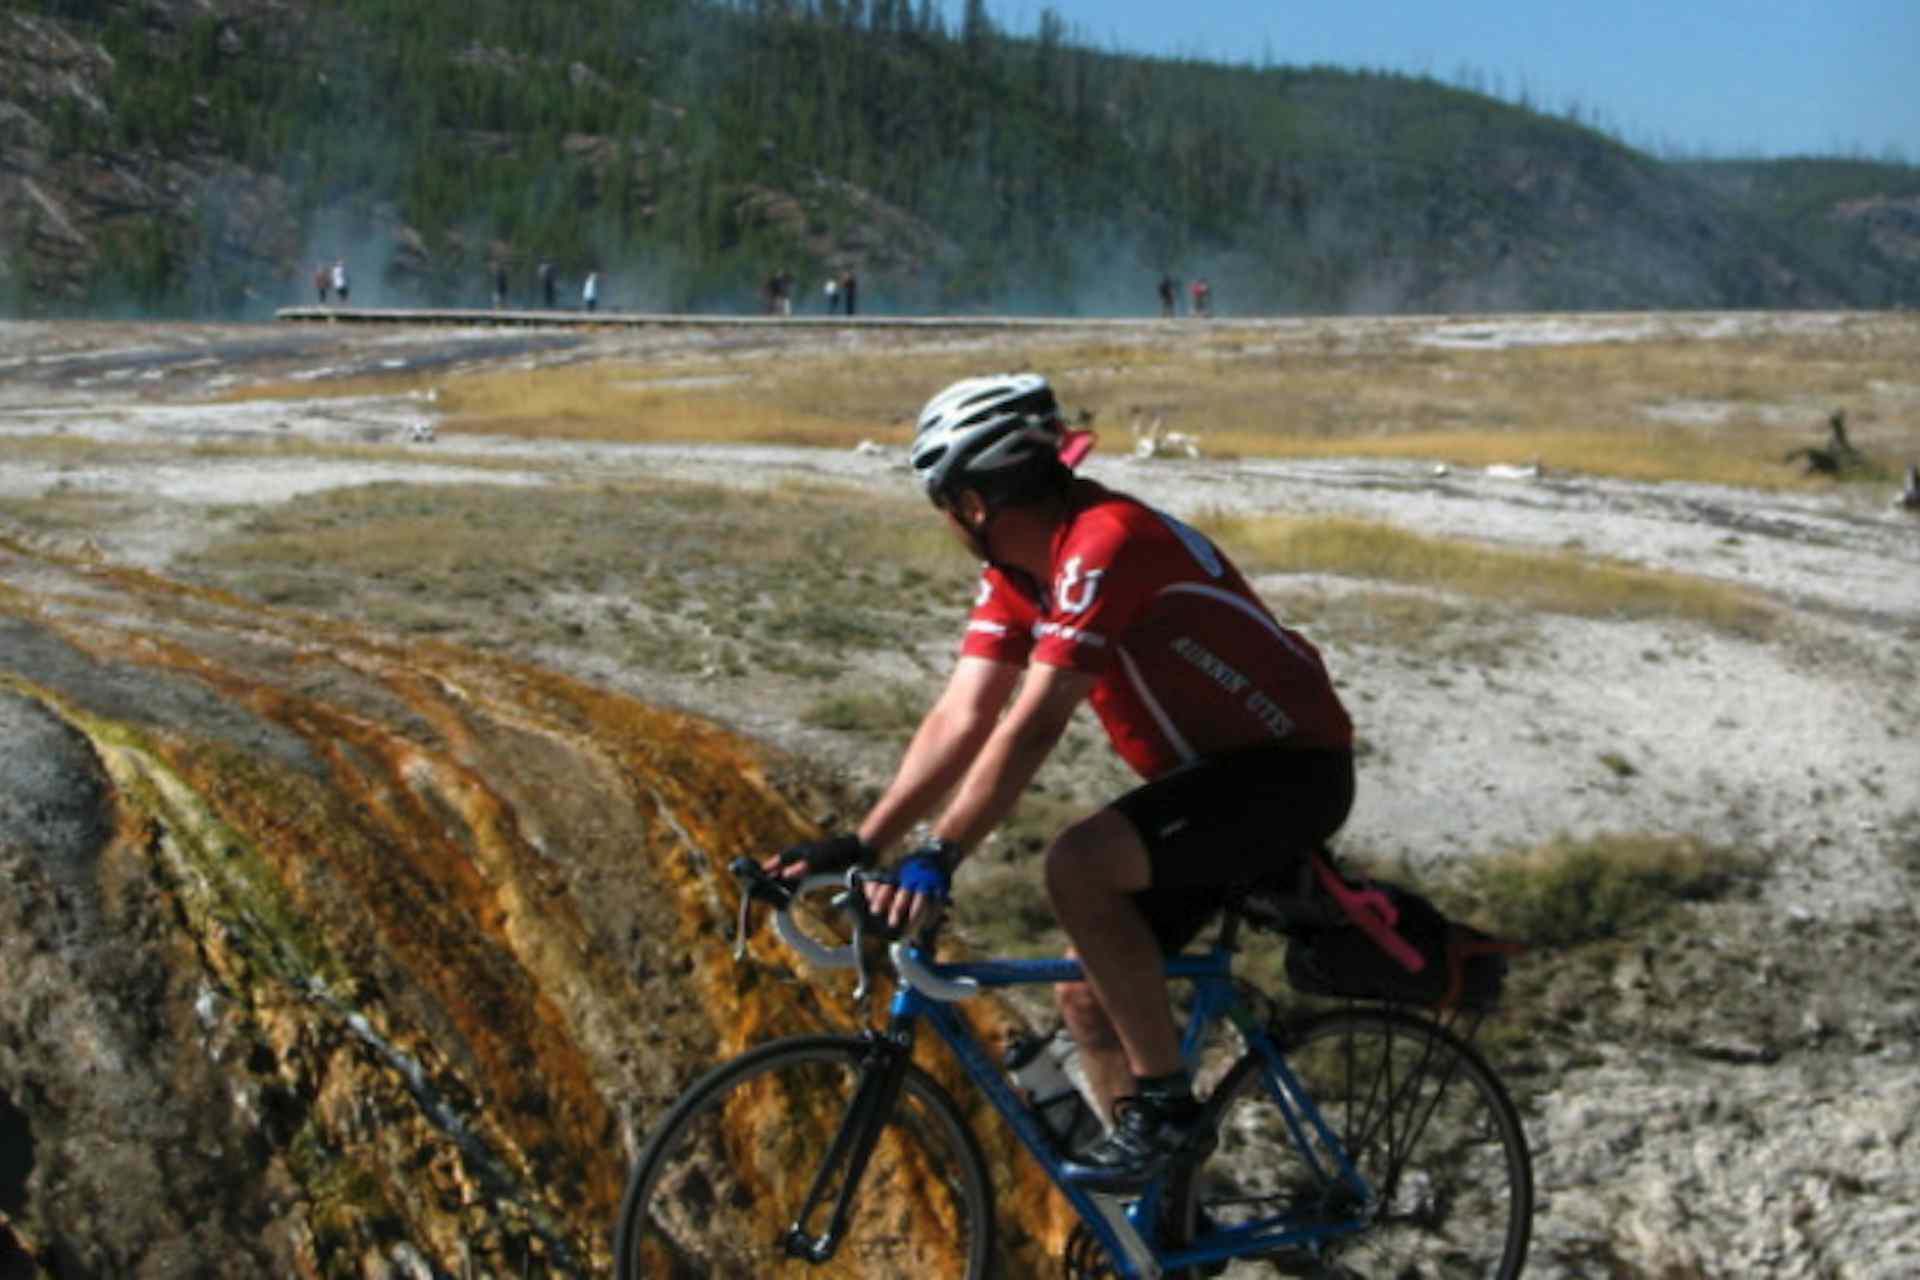 Cyclist next to Old Faithful in Yellowstone National Park in Yellowstone Teton Territory.